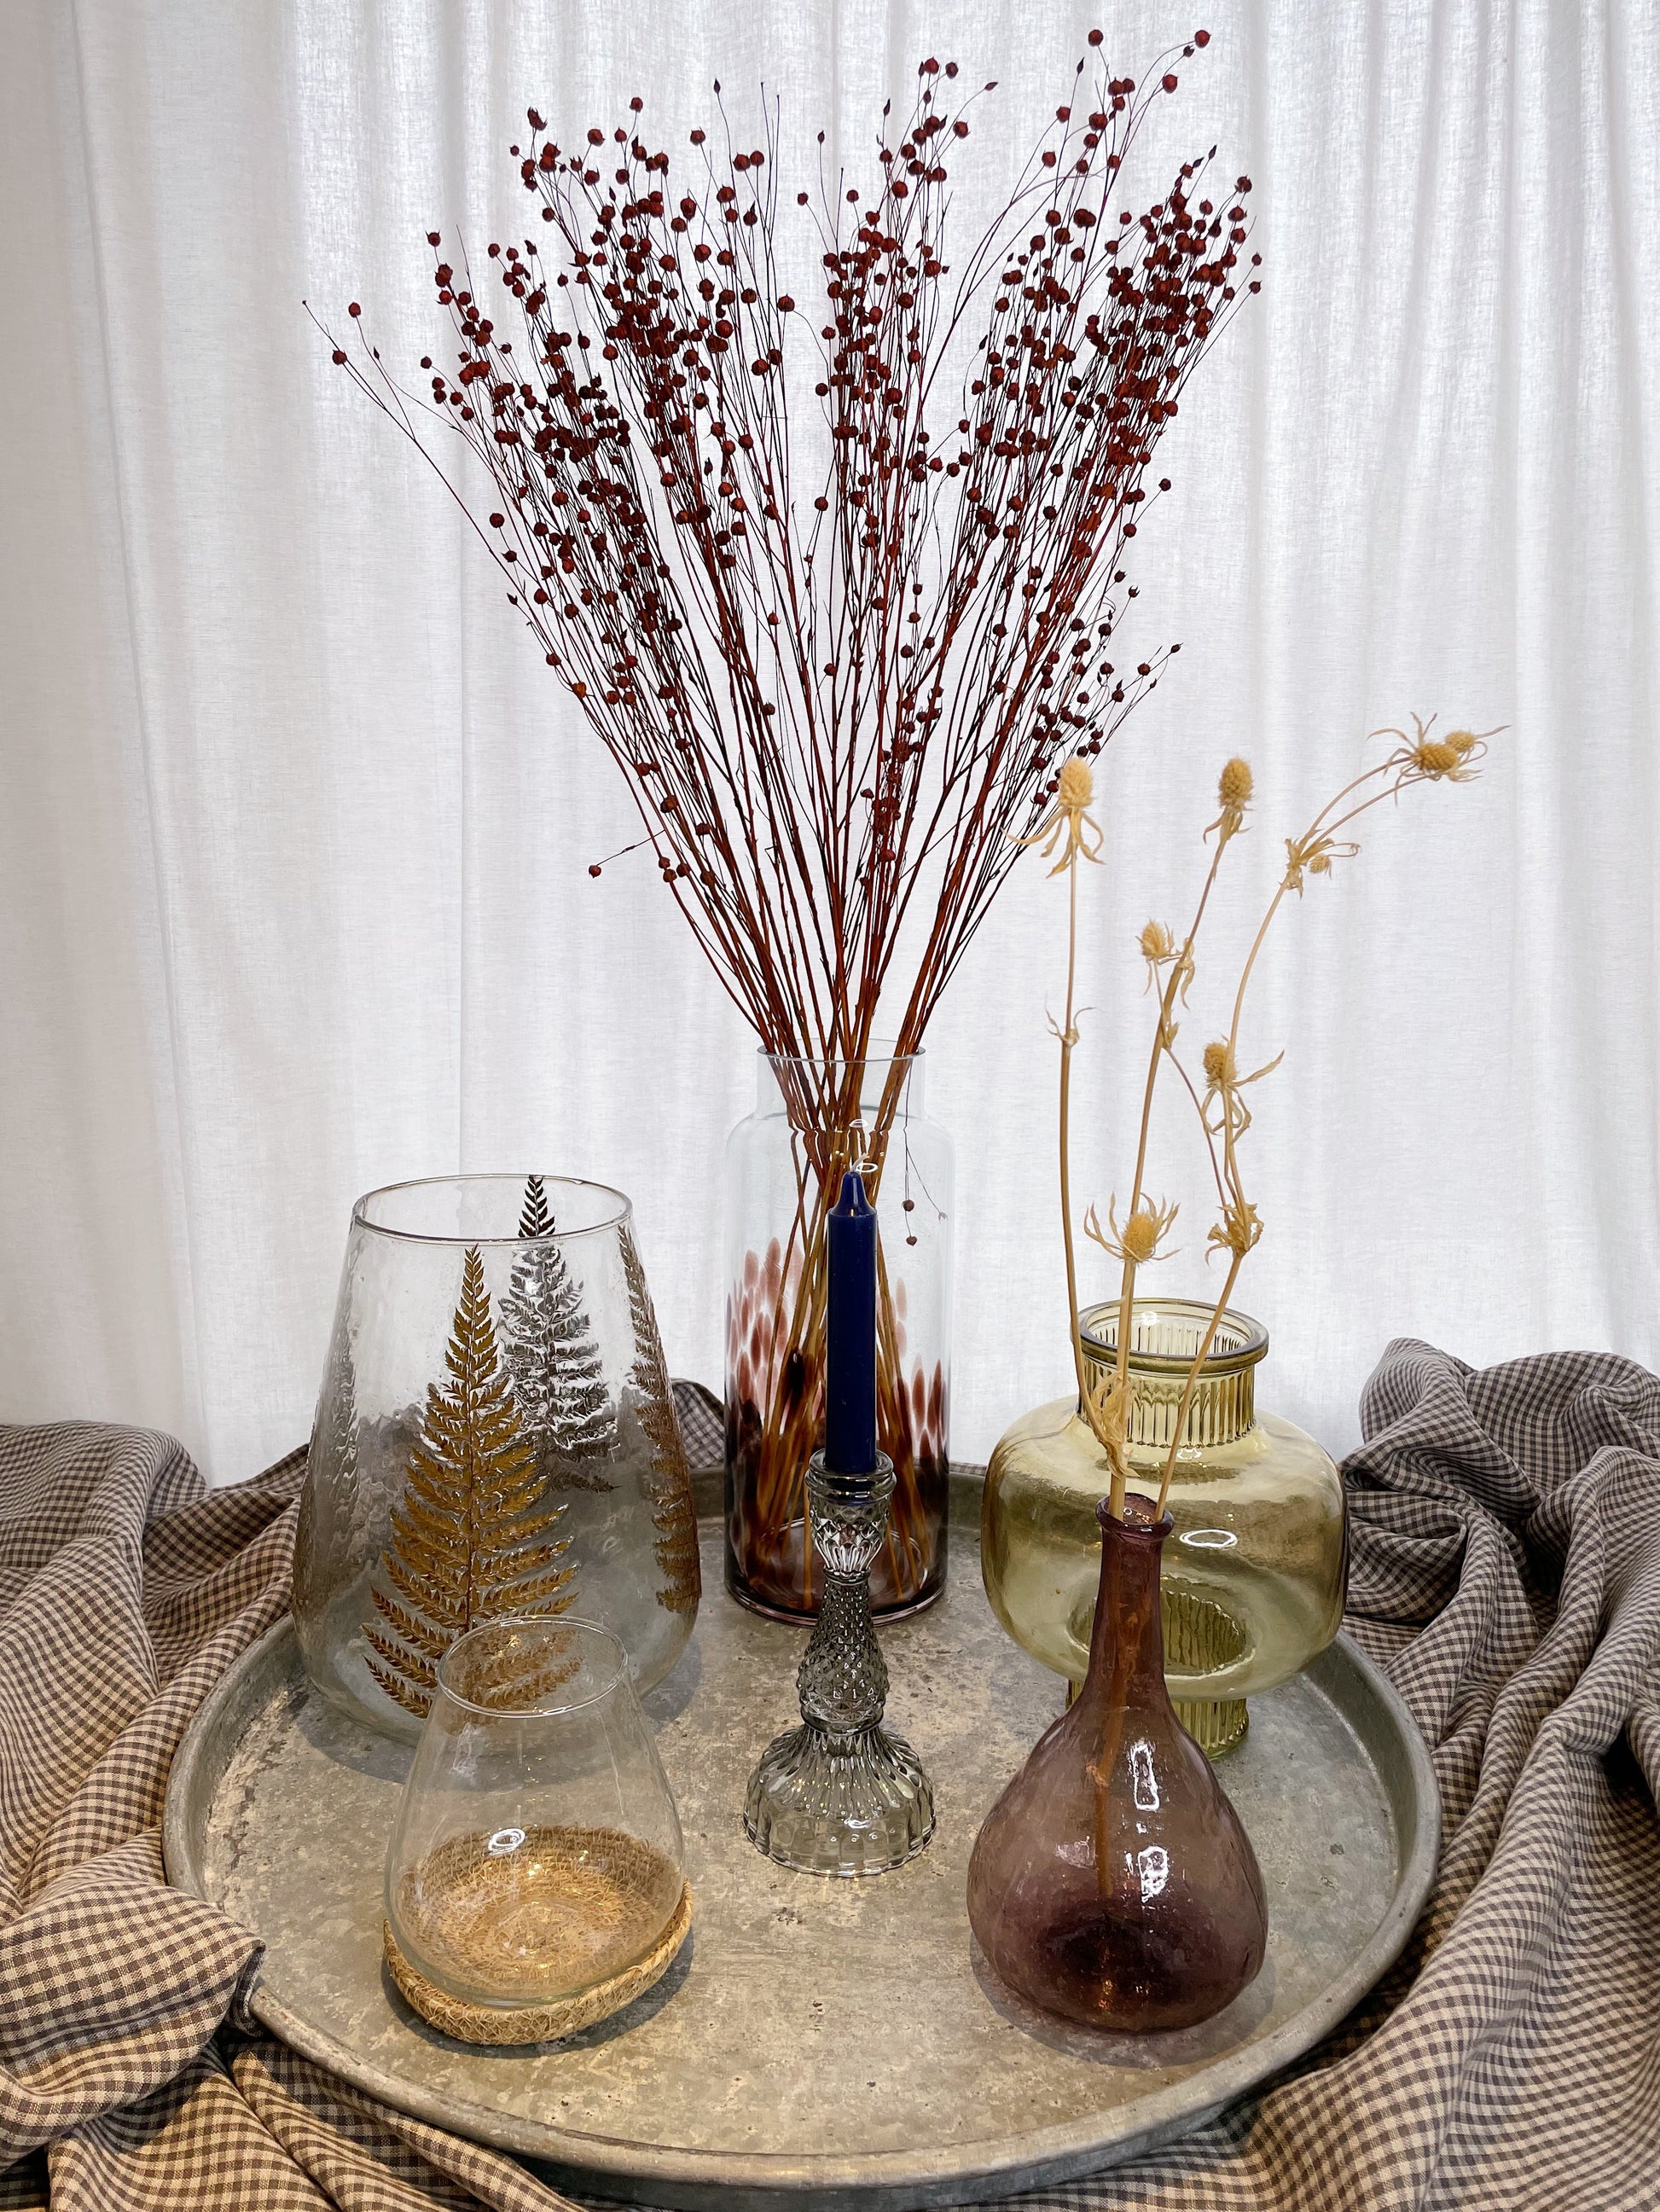 A selection of glass vases and candlesticks/votives on a metal tray, on top of a check tablecloth 